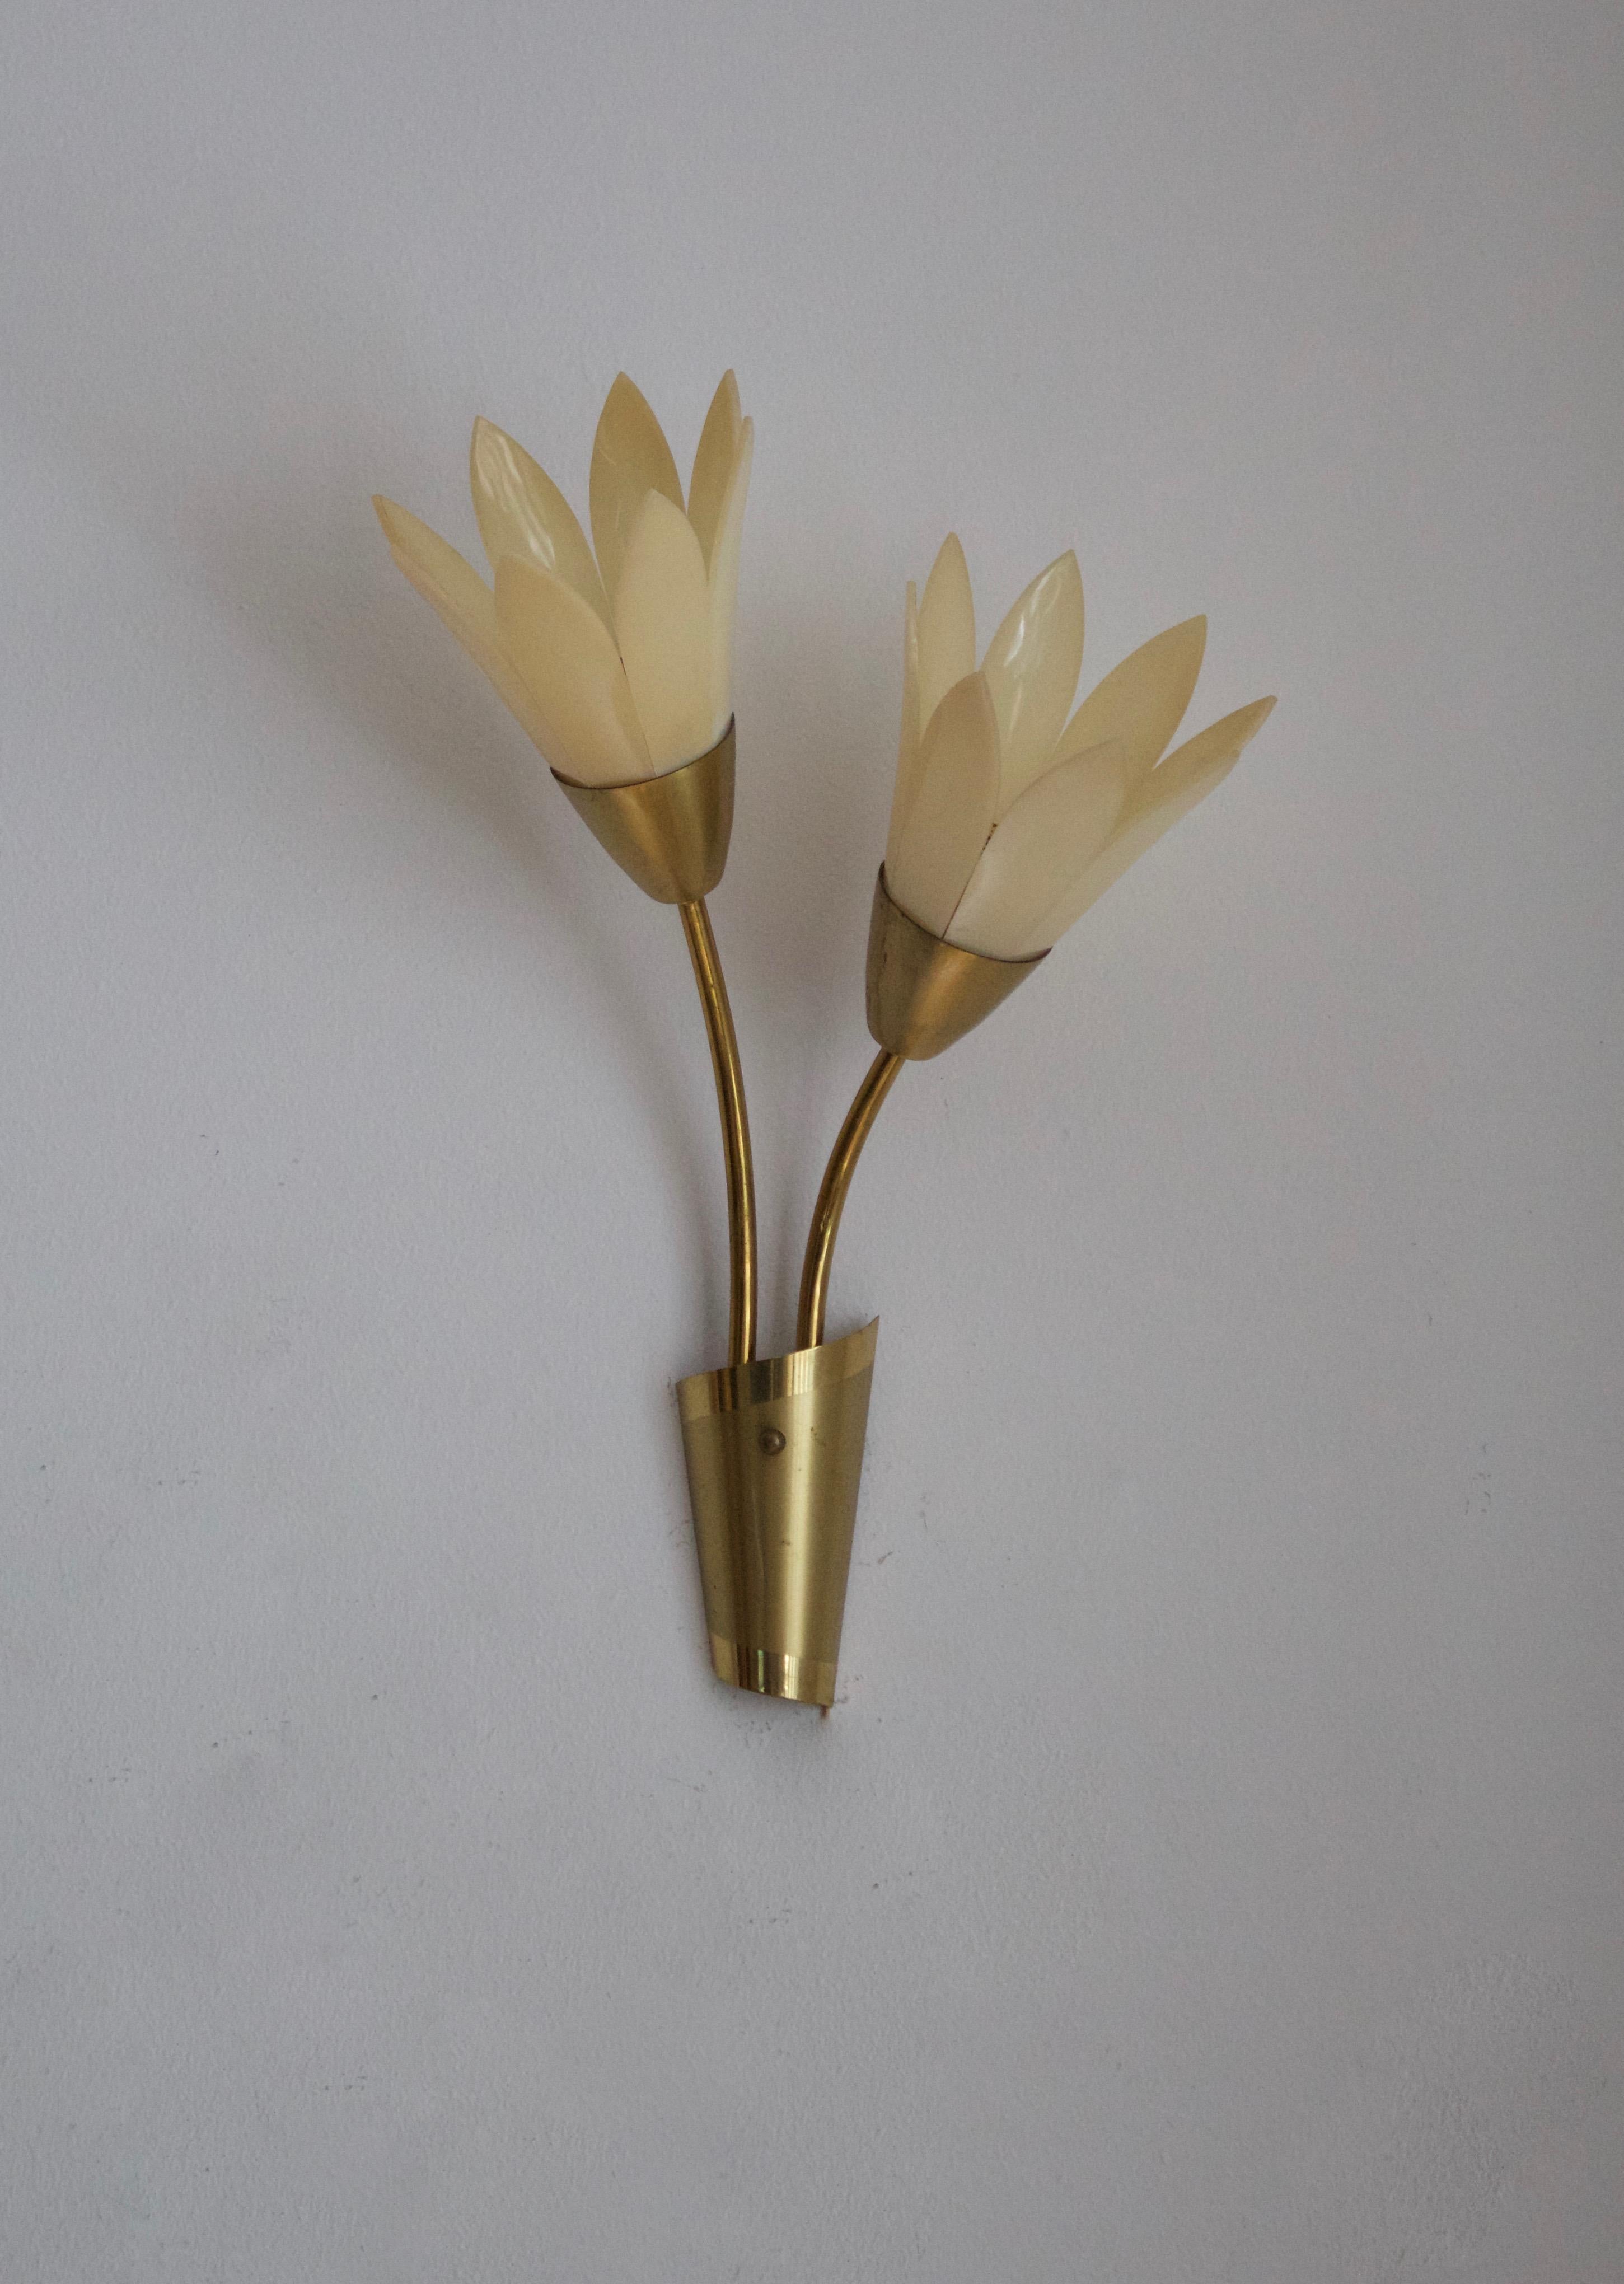 A pair of wall lights / Sconces. Designed and produced in Sweden, 1950s-1960s.

Other designers of the period include Paavo Tynell, Jean Royère, Hans Bergström, Hans-Agne Jakobsson, and Kaare Klint.